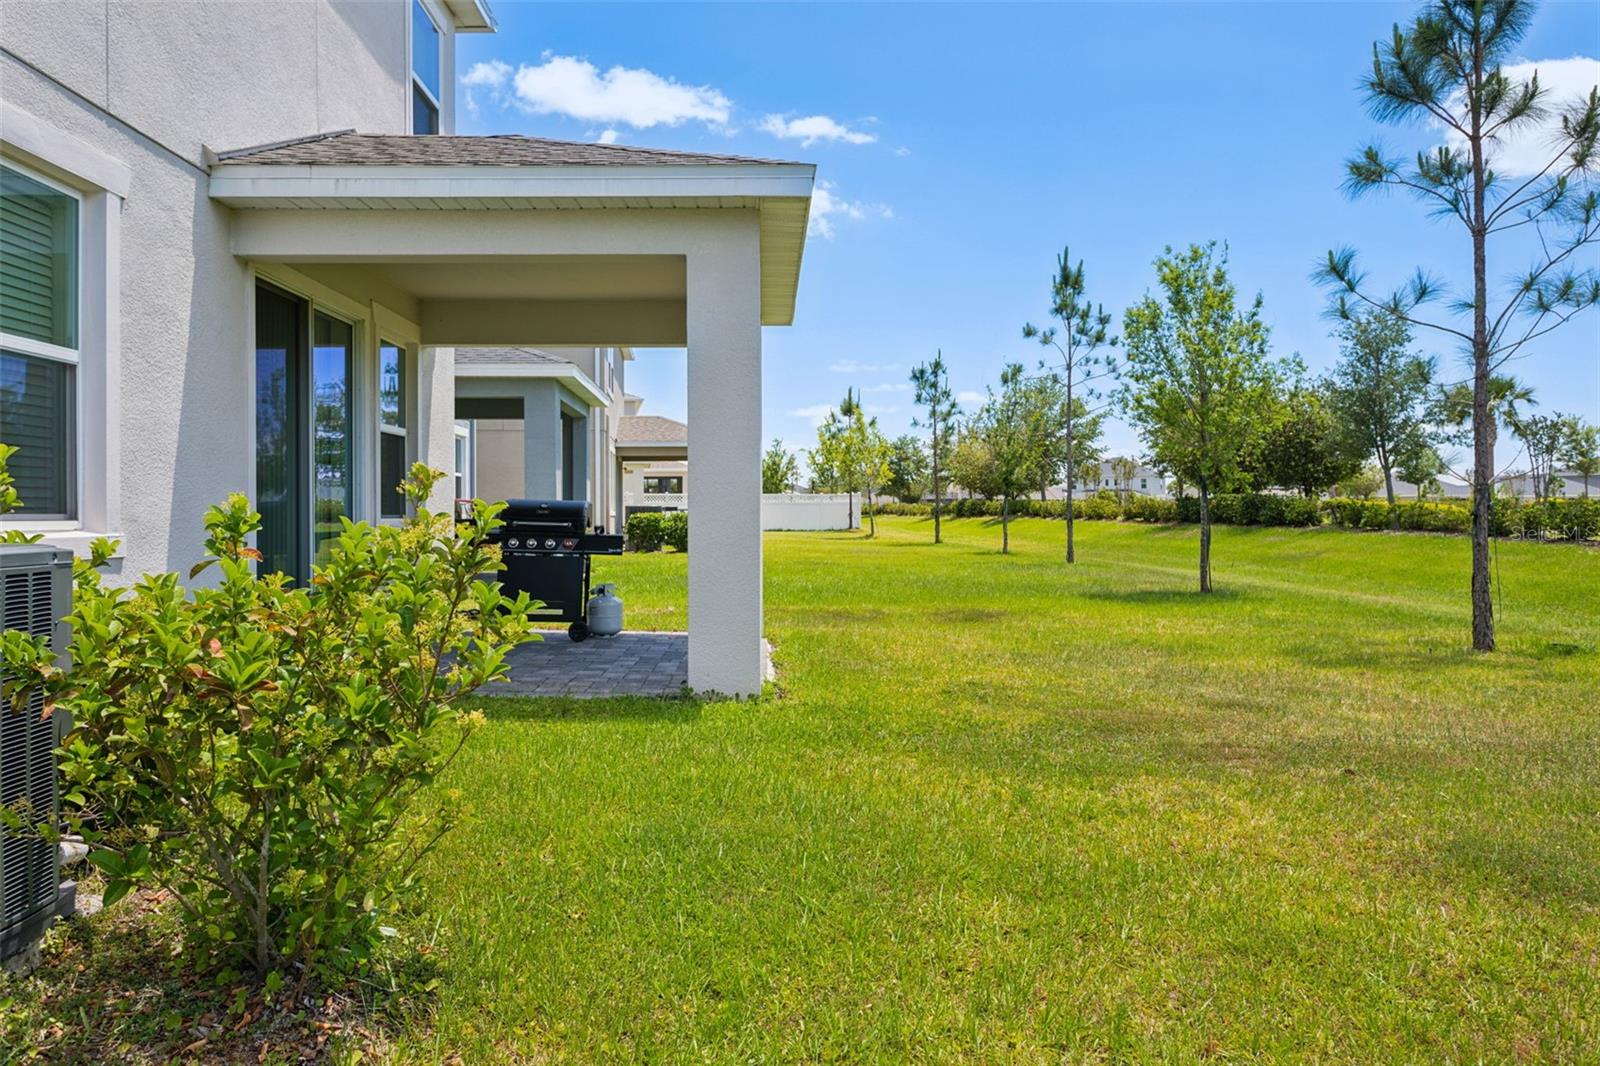 The backyard can be fenced in with 6' privacy fencing, screen in or extend your patio area!